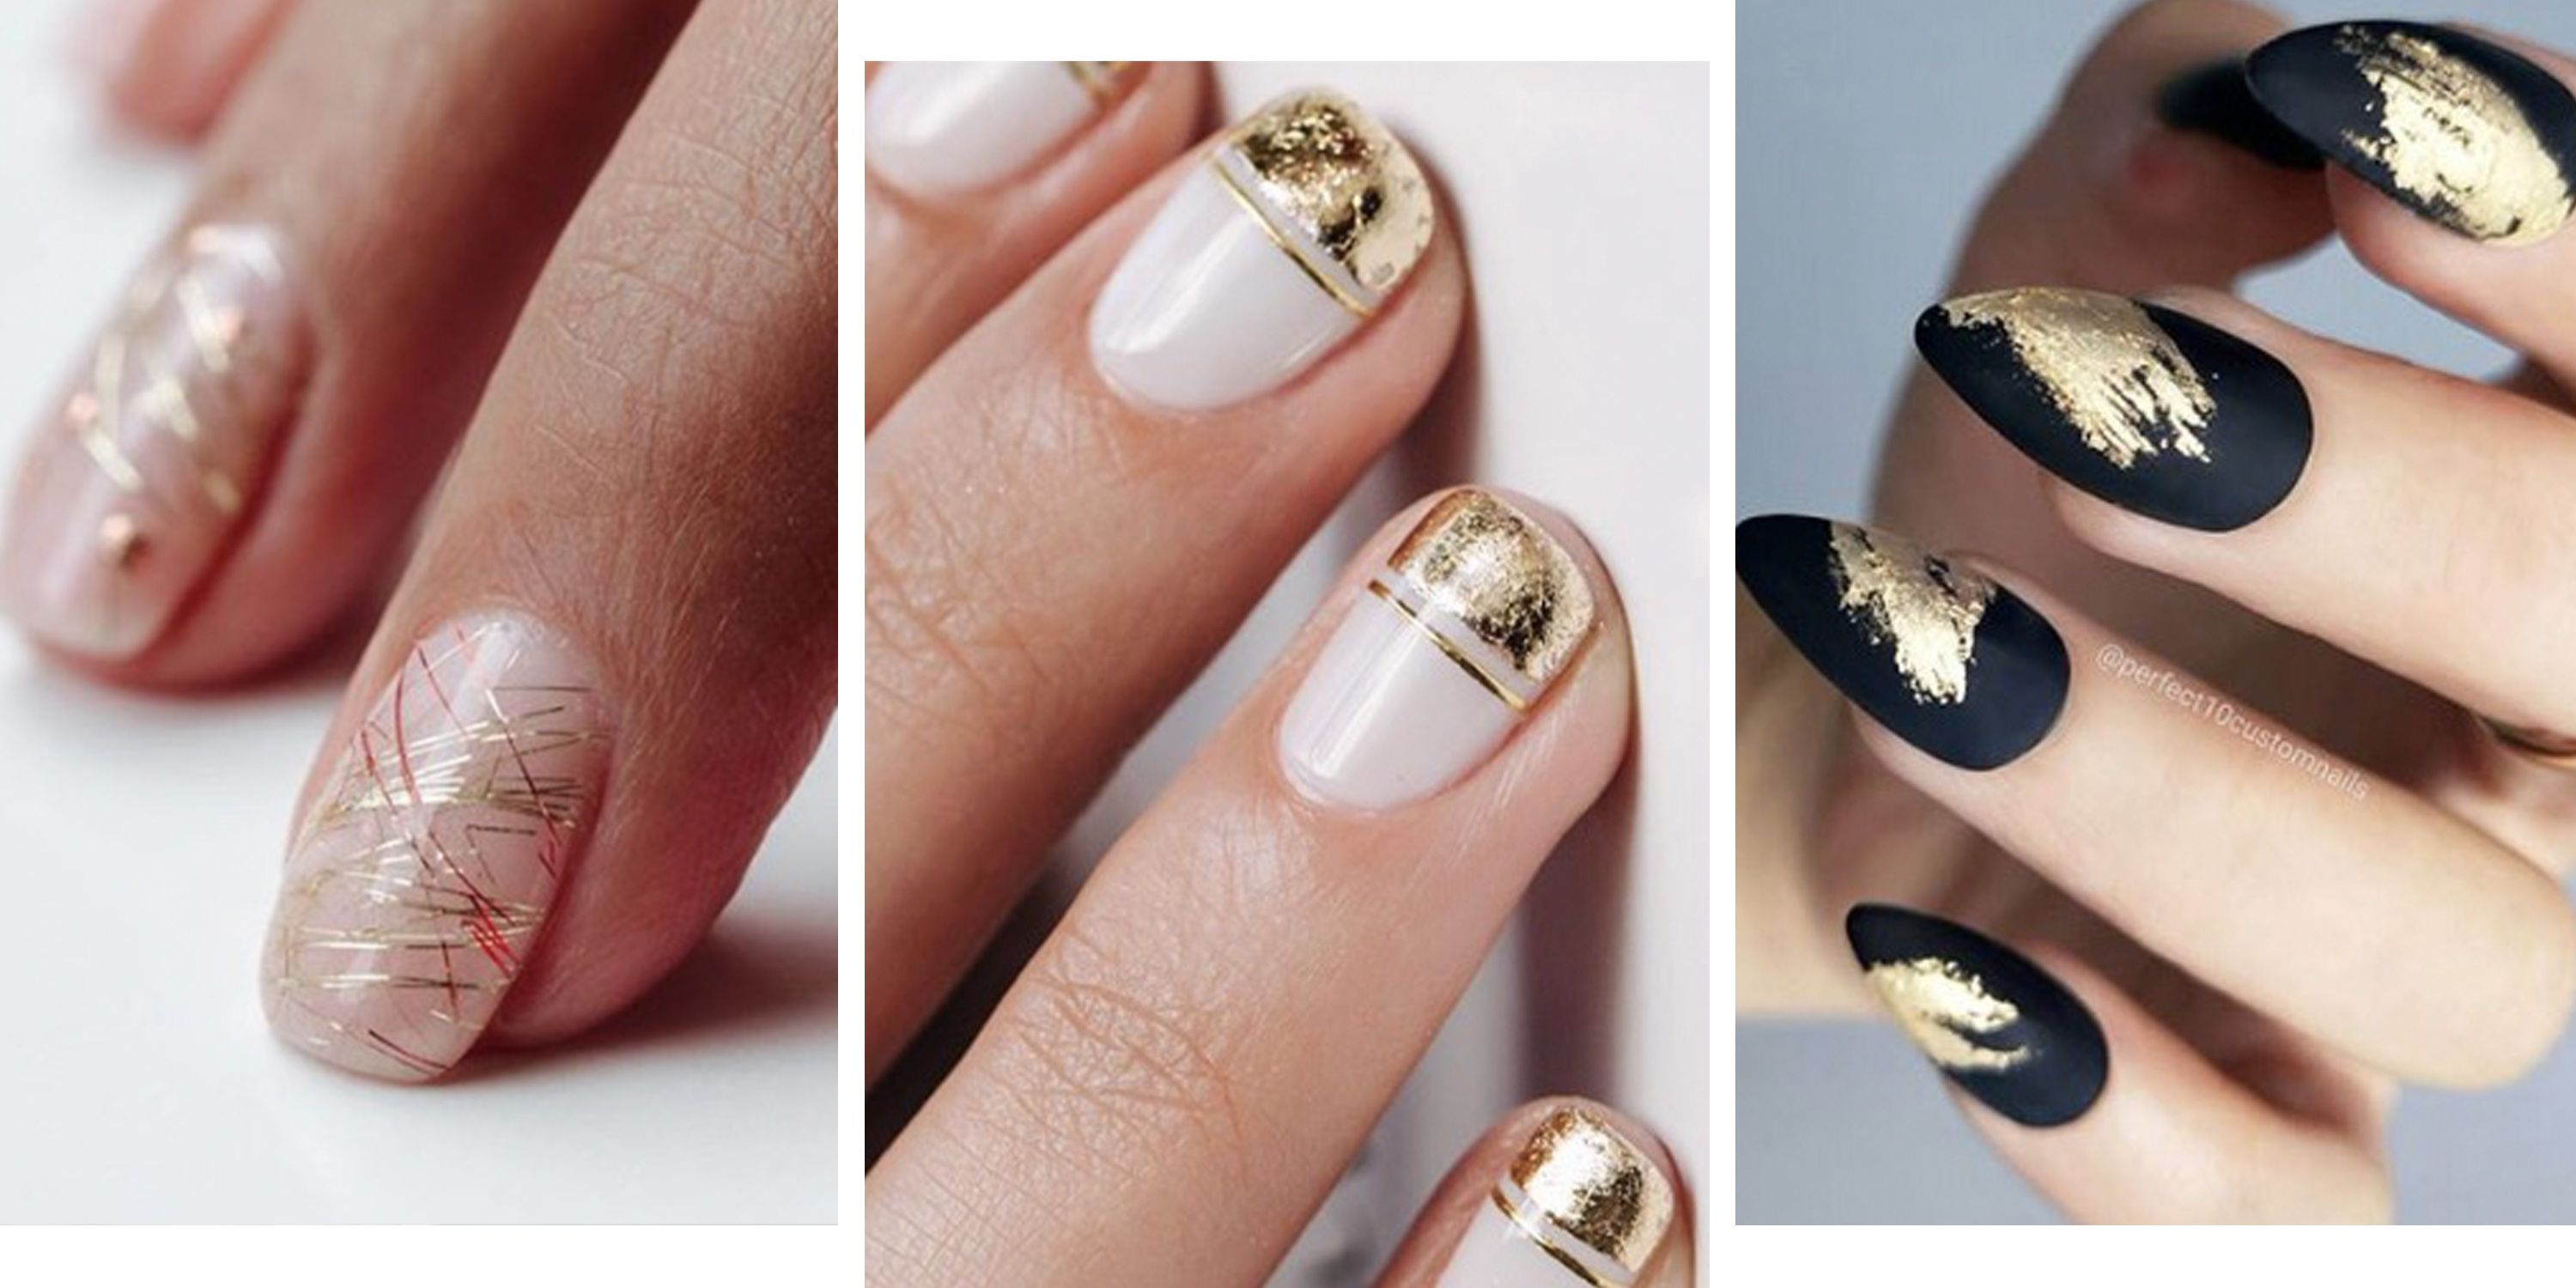 2. Elegant Grey and Gold Nail Design - wide 11